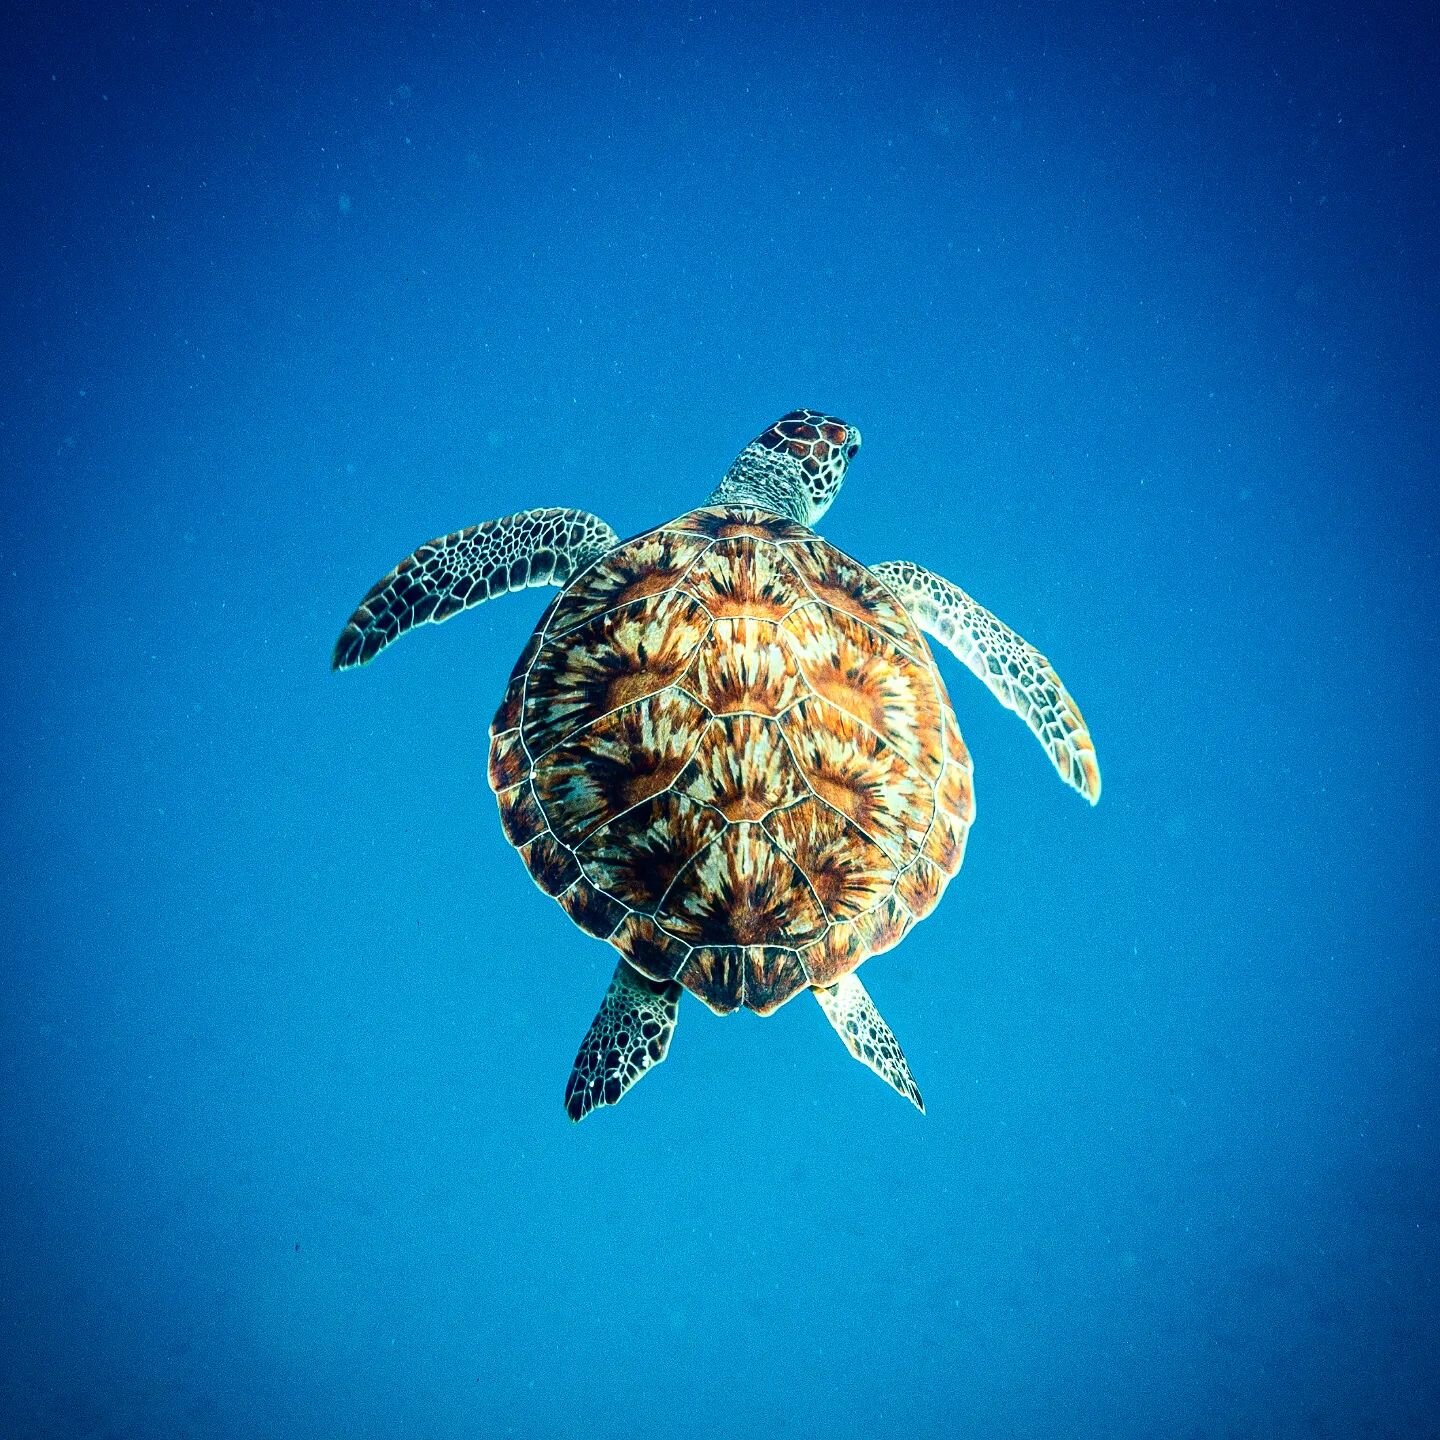 Sea turtles have taught me a lot about being chill underwater. Smoothing and slowing my movements has direct impact on how much I effect turtles and fish and the other marine life I am dicing with. When I chill, they chill.

#freediving #seaturtle #g